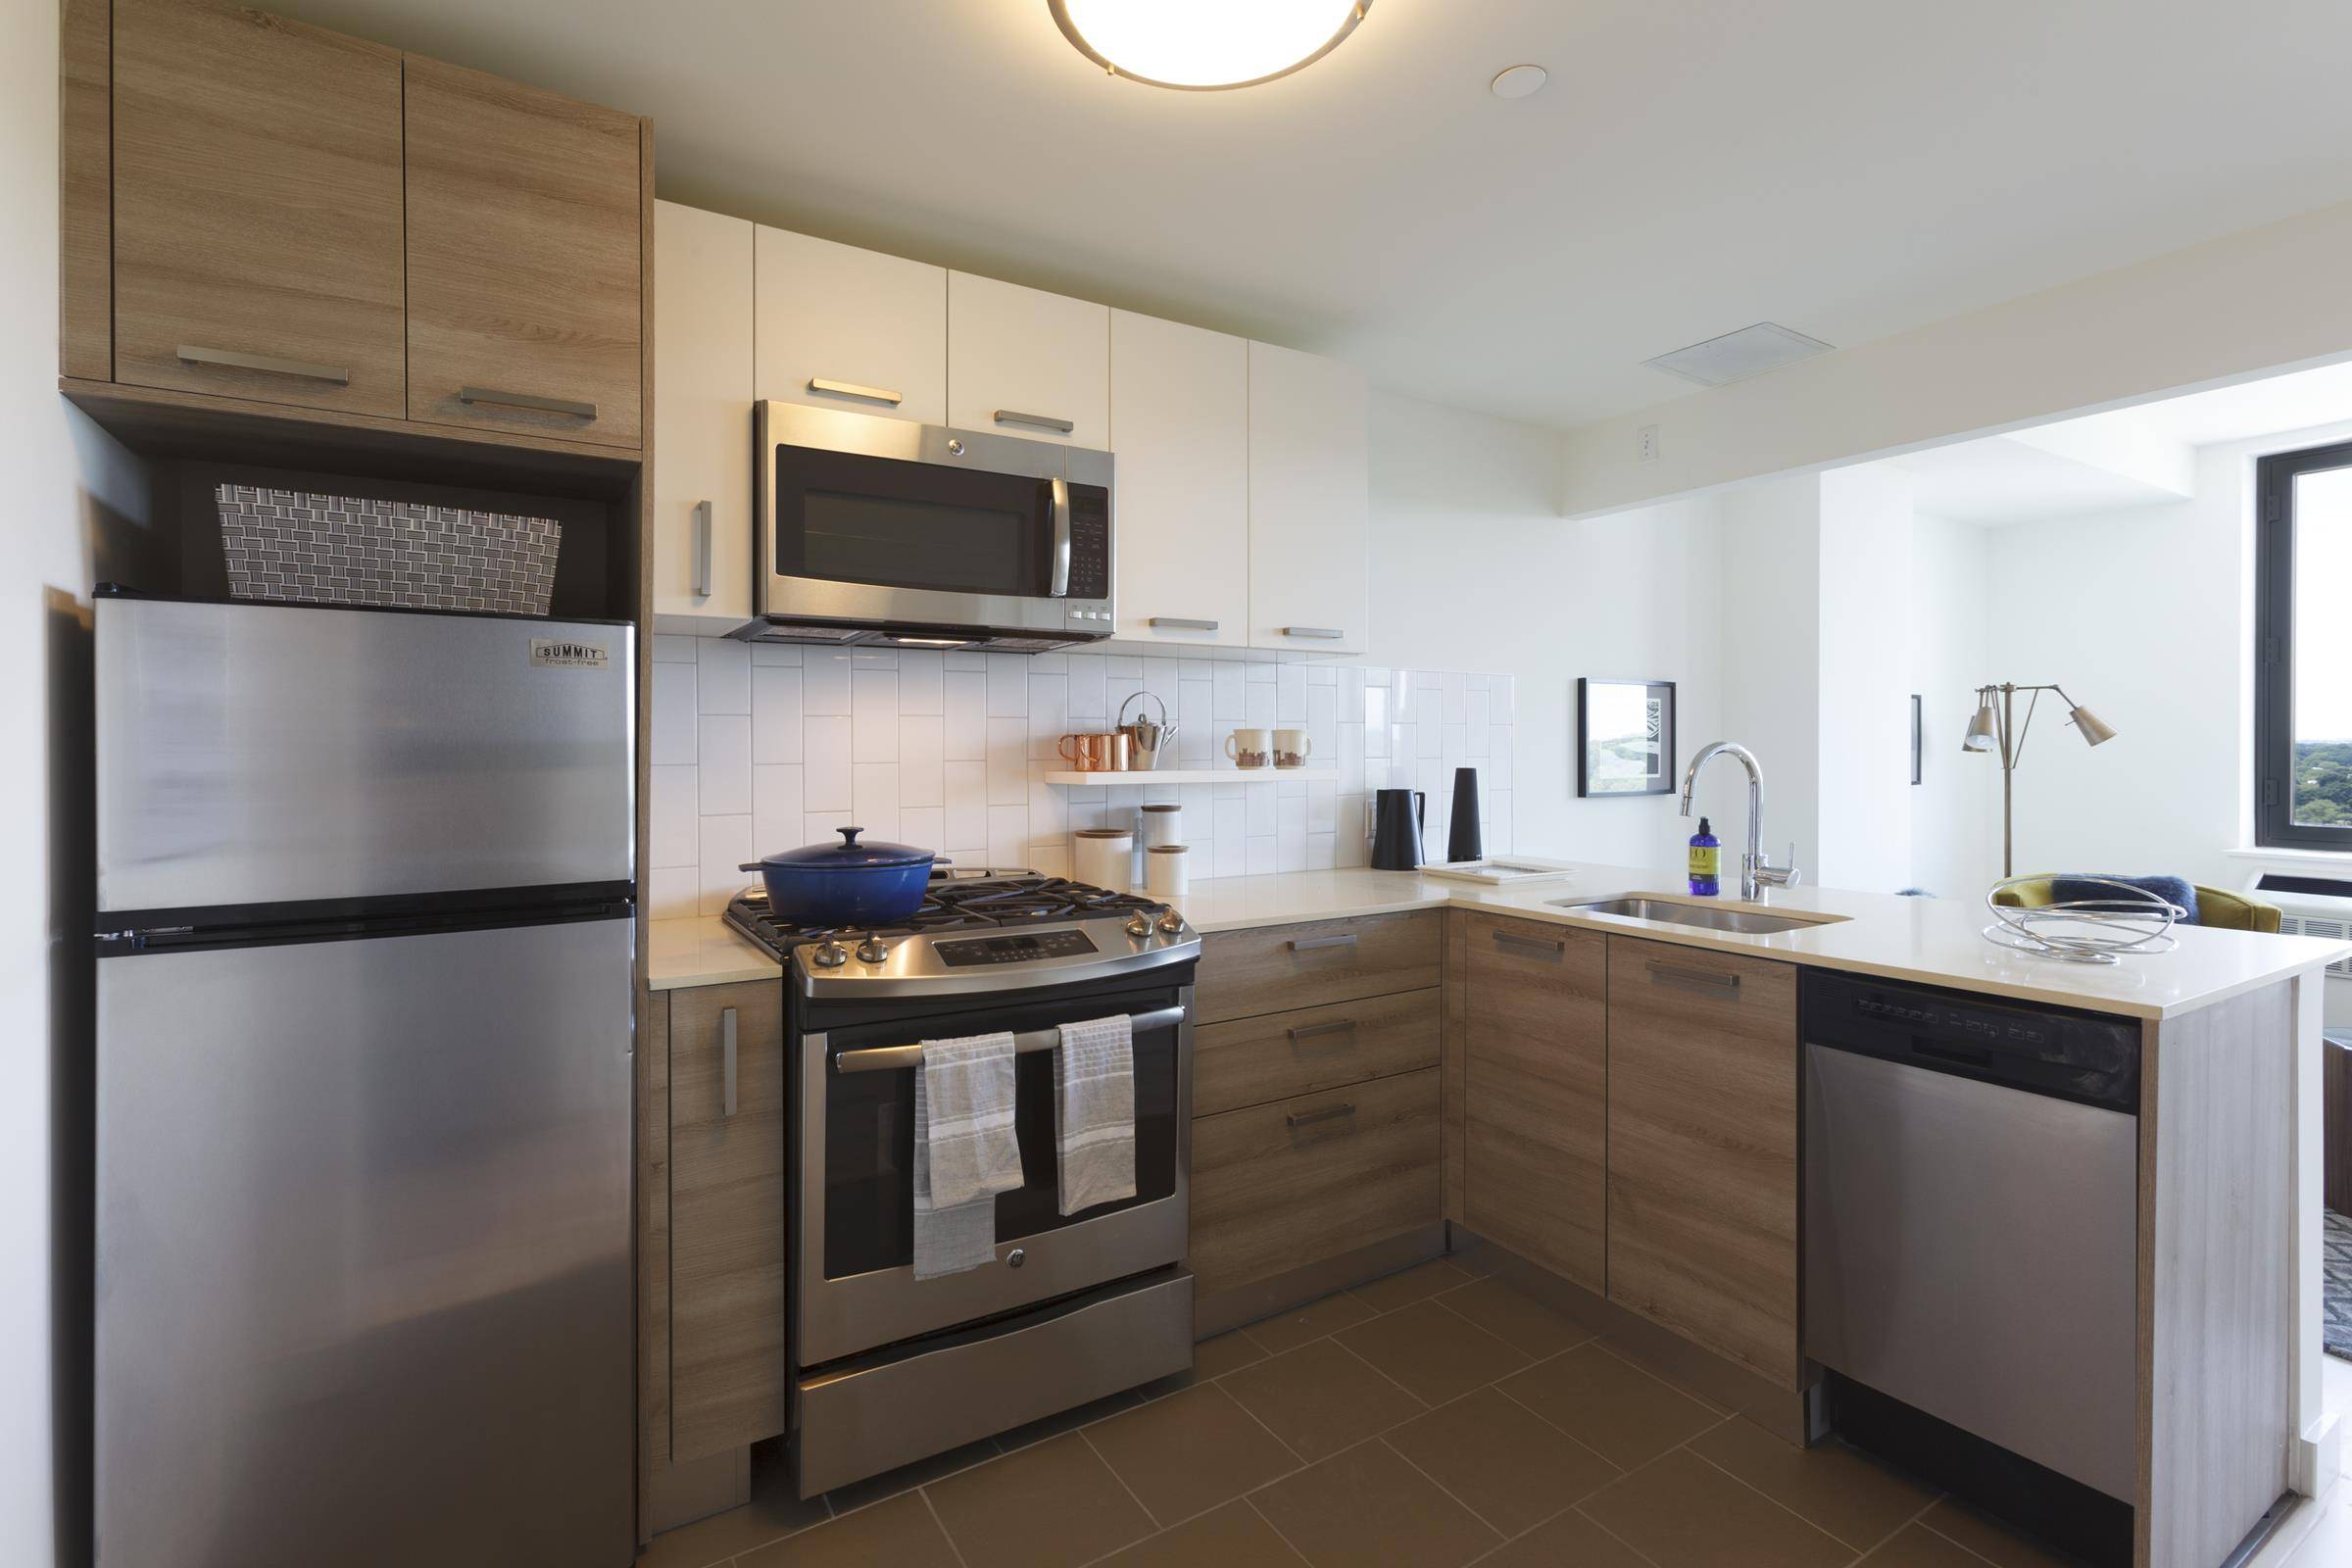 This bright, charming studio is located in The Parkline, a stunning new rental complex that unveils breathtaking views of Prospect Park, the Manhattan Skyline and the storied streetscapes of Brooklyn.